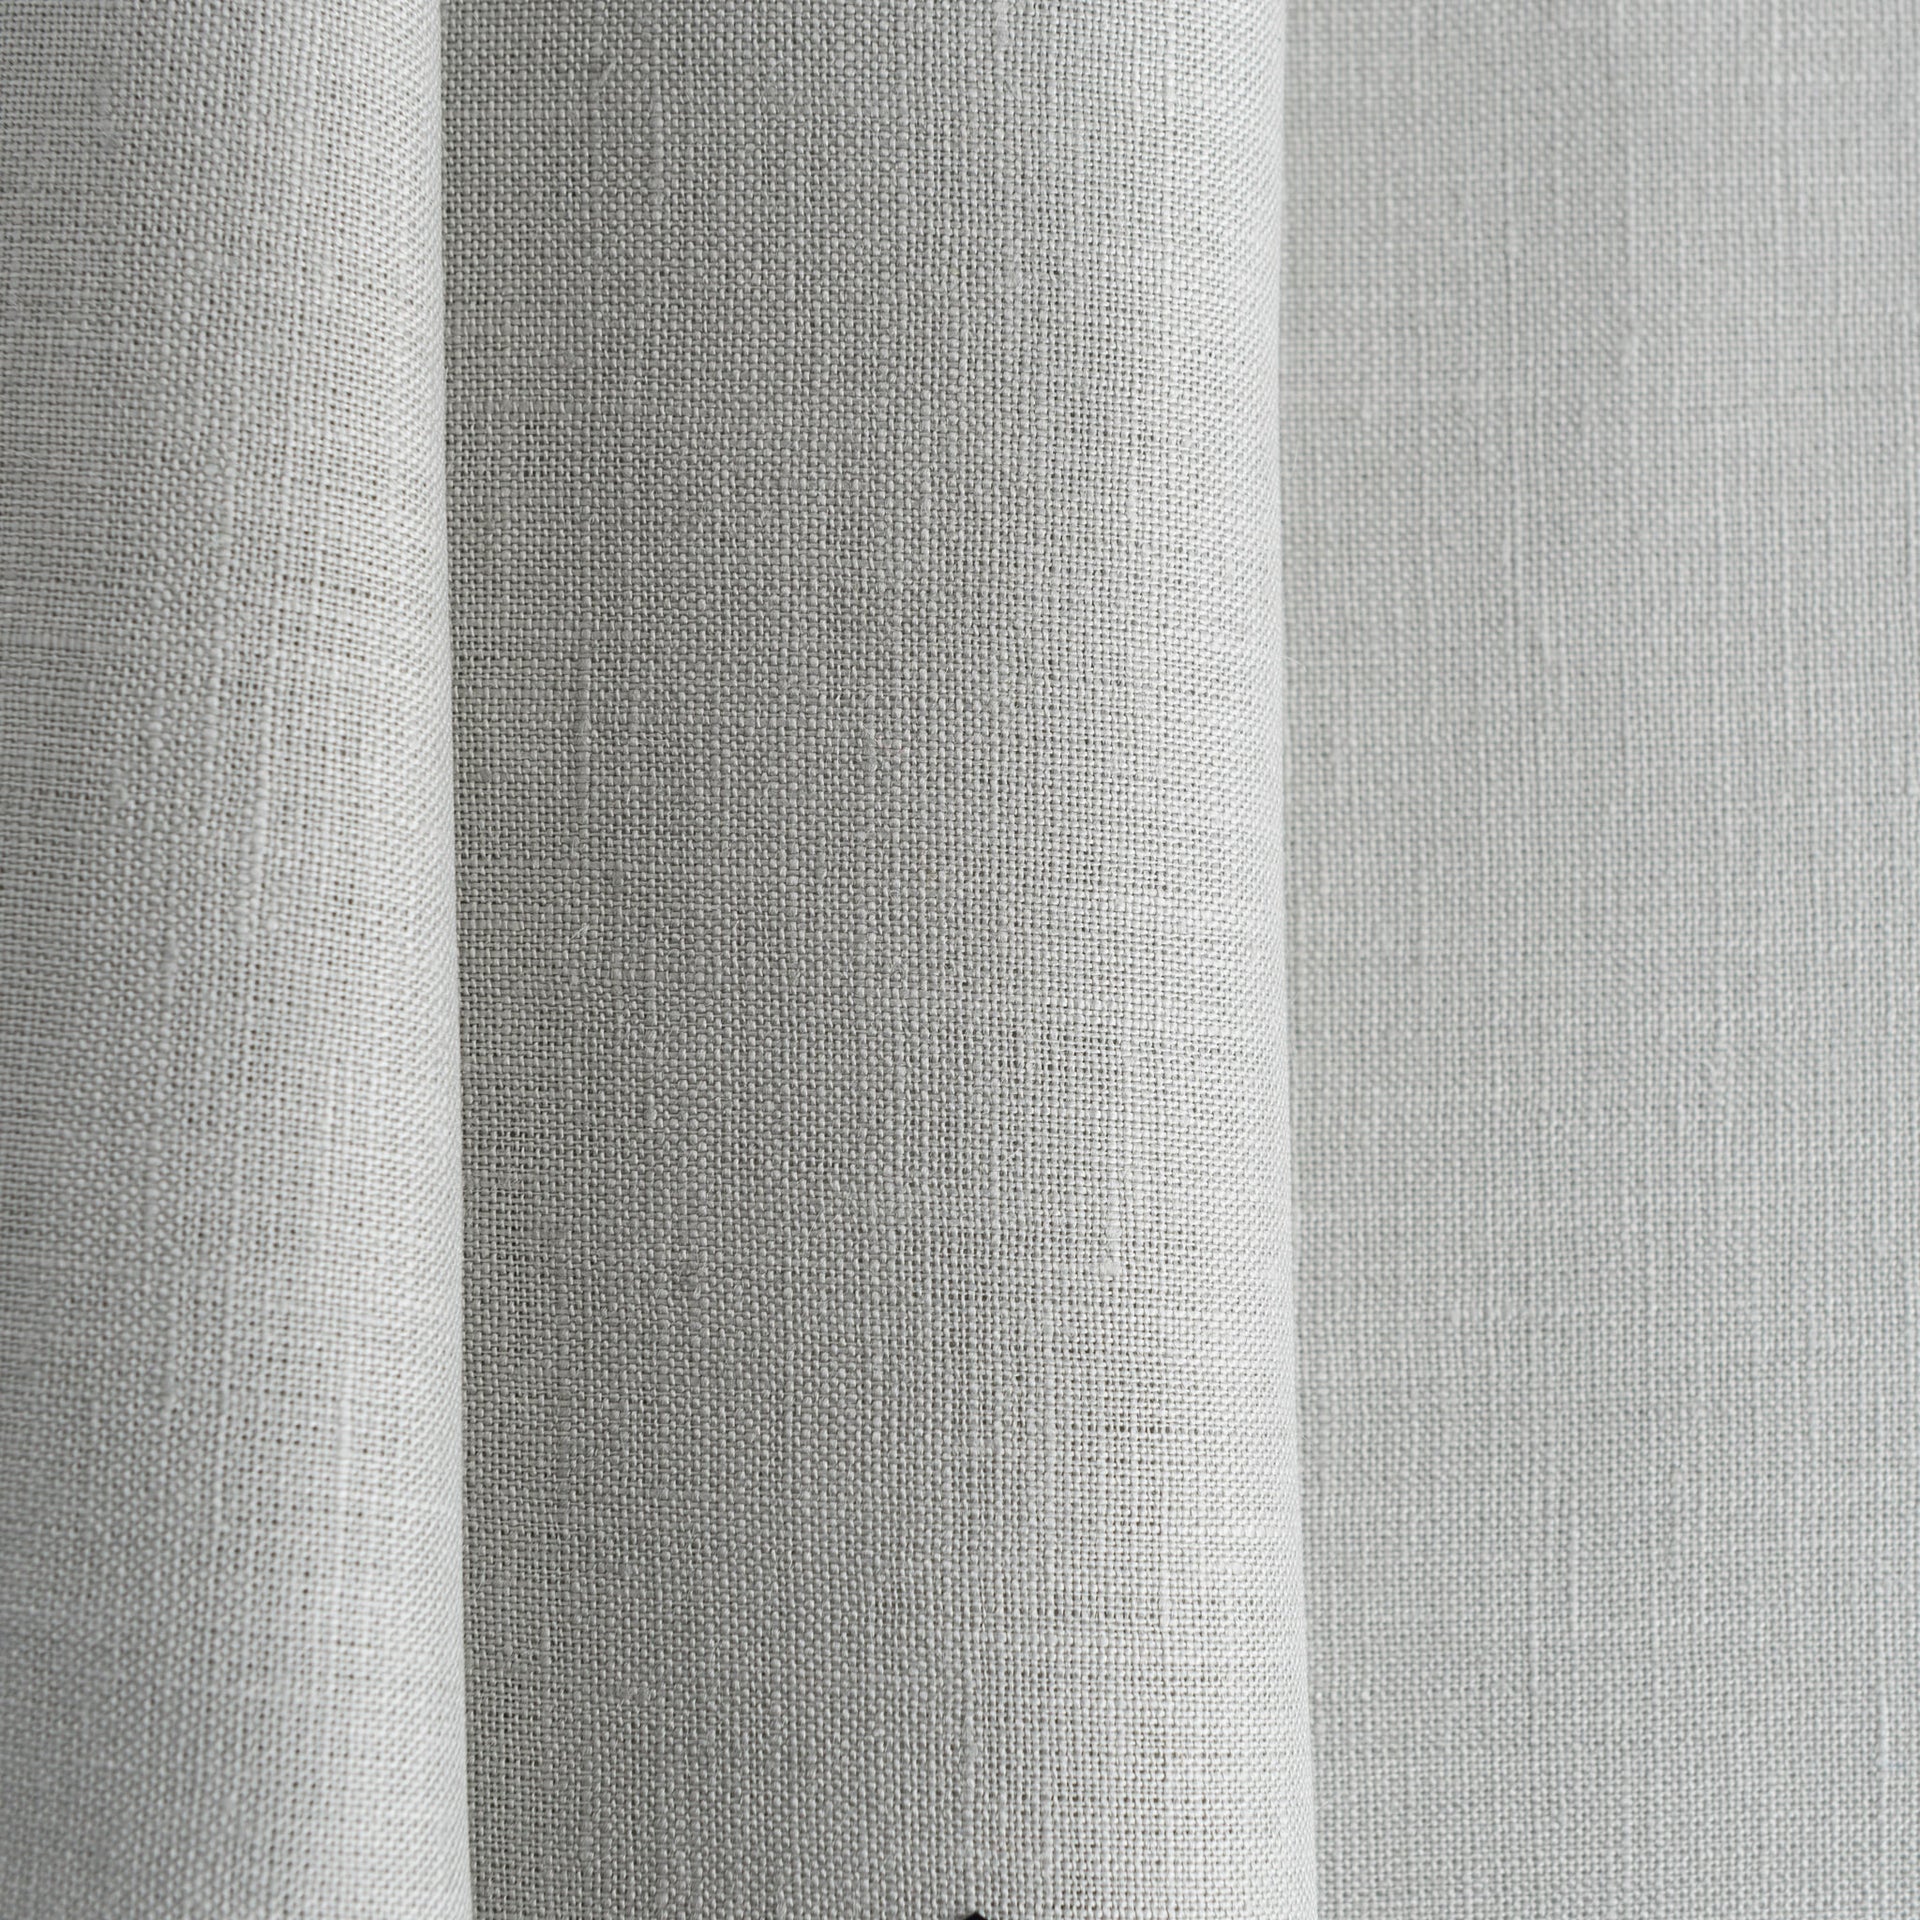 Grey Linen Curtain with White Cotton Lining and Rod Pocket - Custom Sizes & Colors